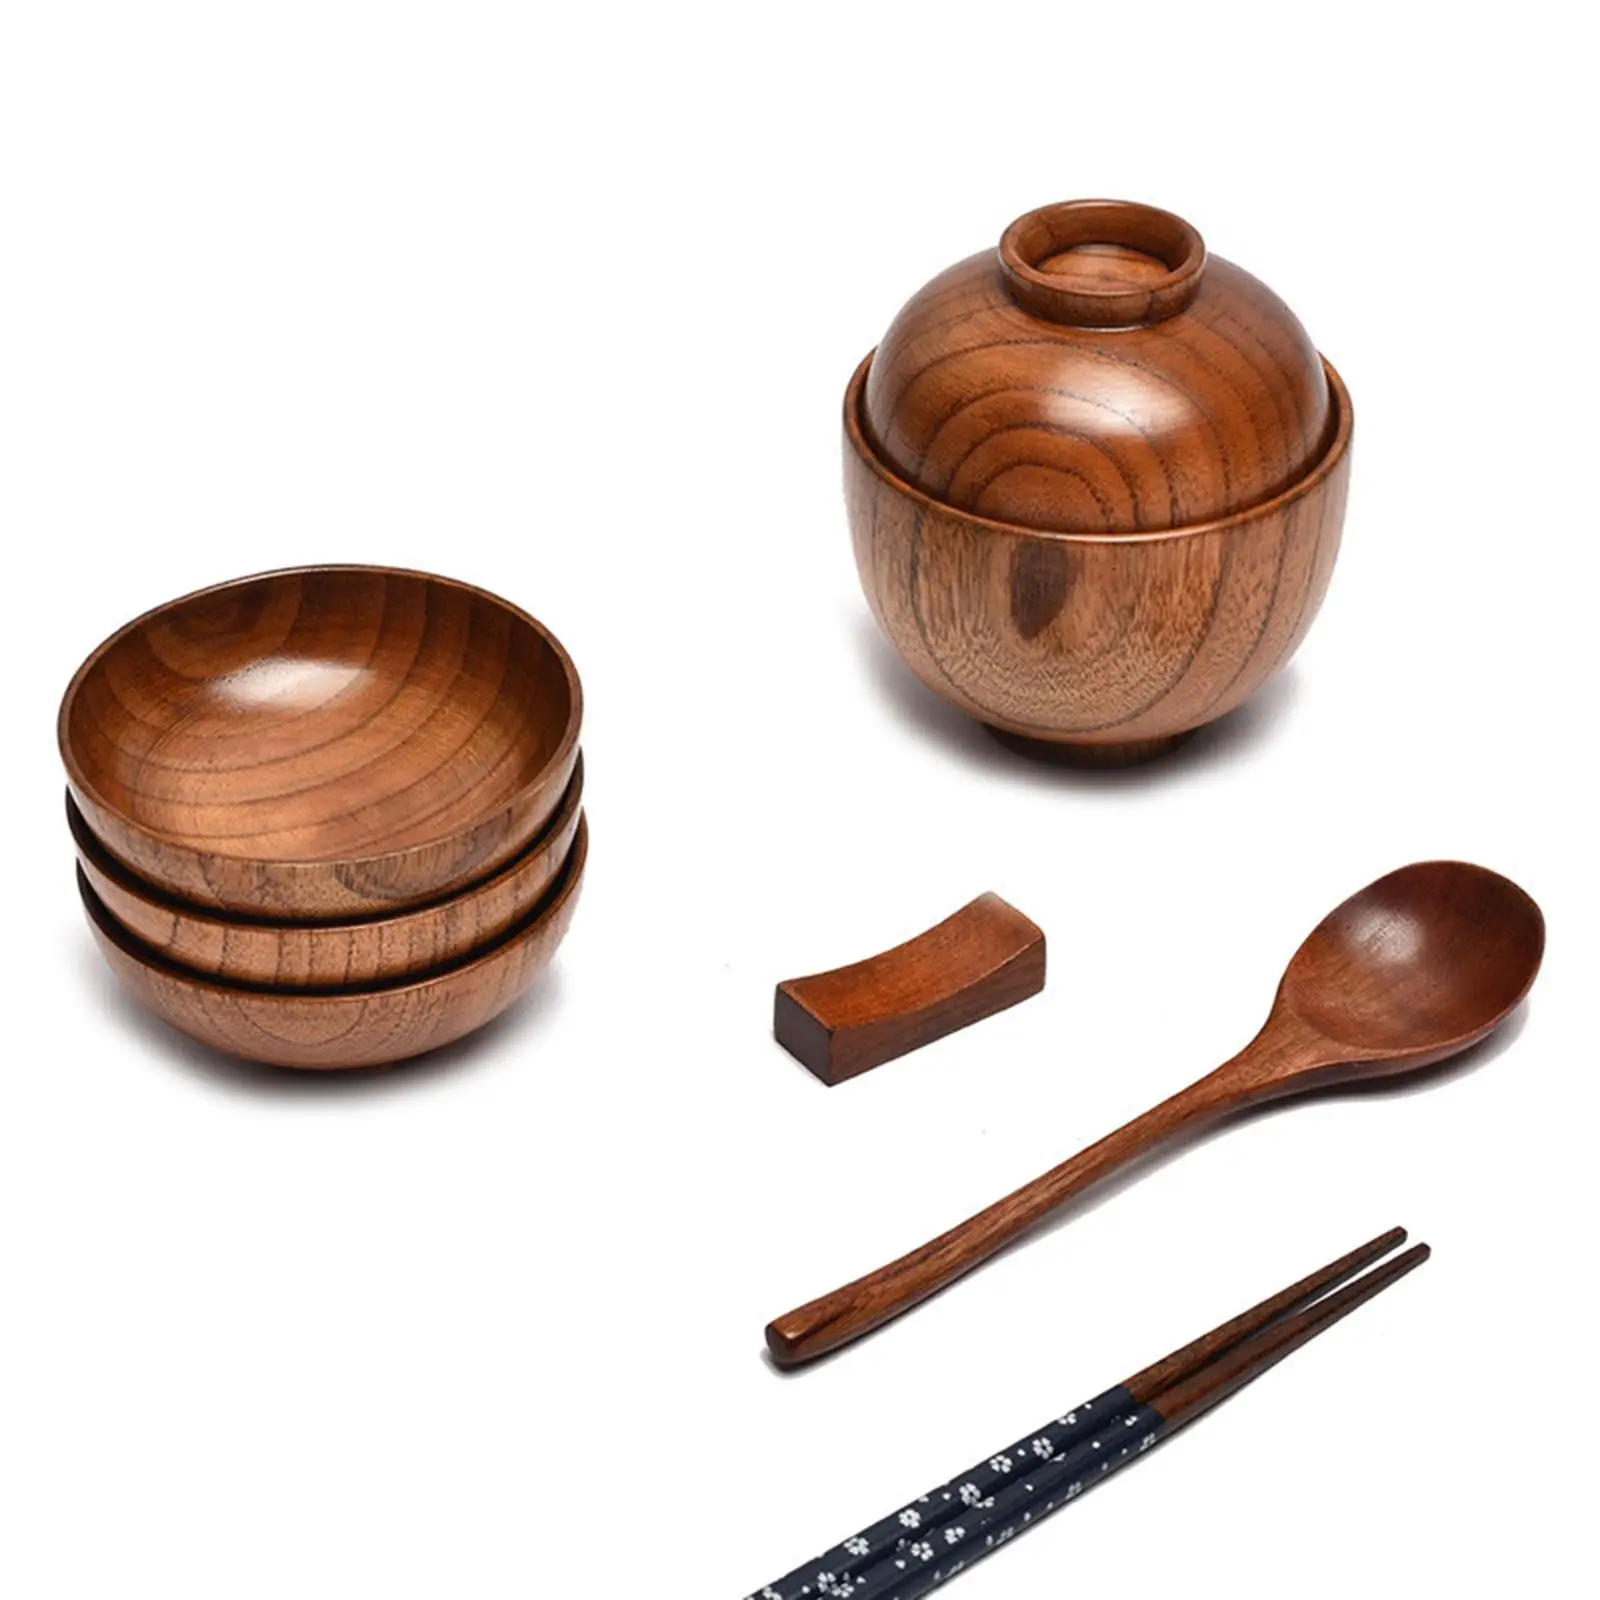 Wooden Bowl with Lid Bowl Tableware Food Utensil Rice Serving Bowl Kitchen Storage Salad Fruits Dinnerware Small Wooden Bowls